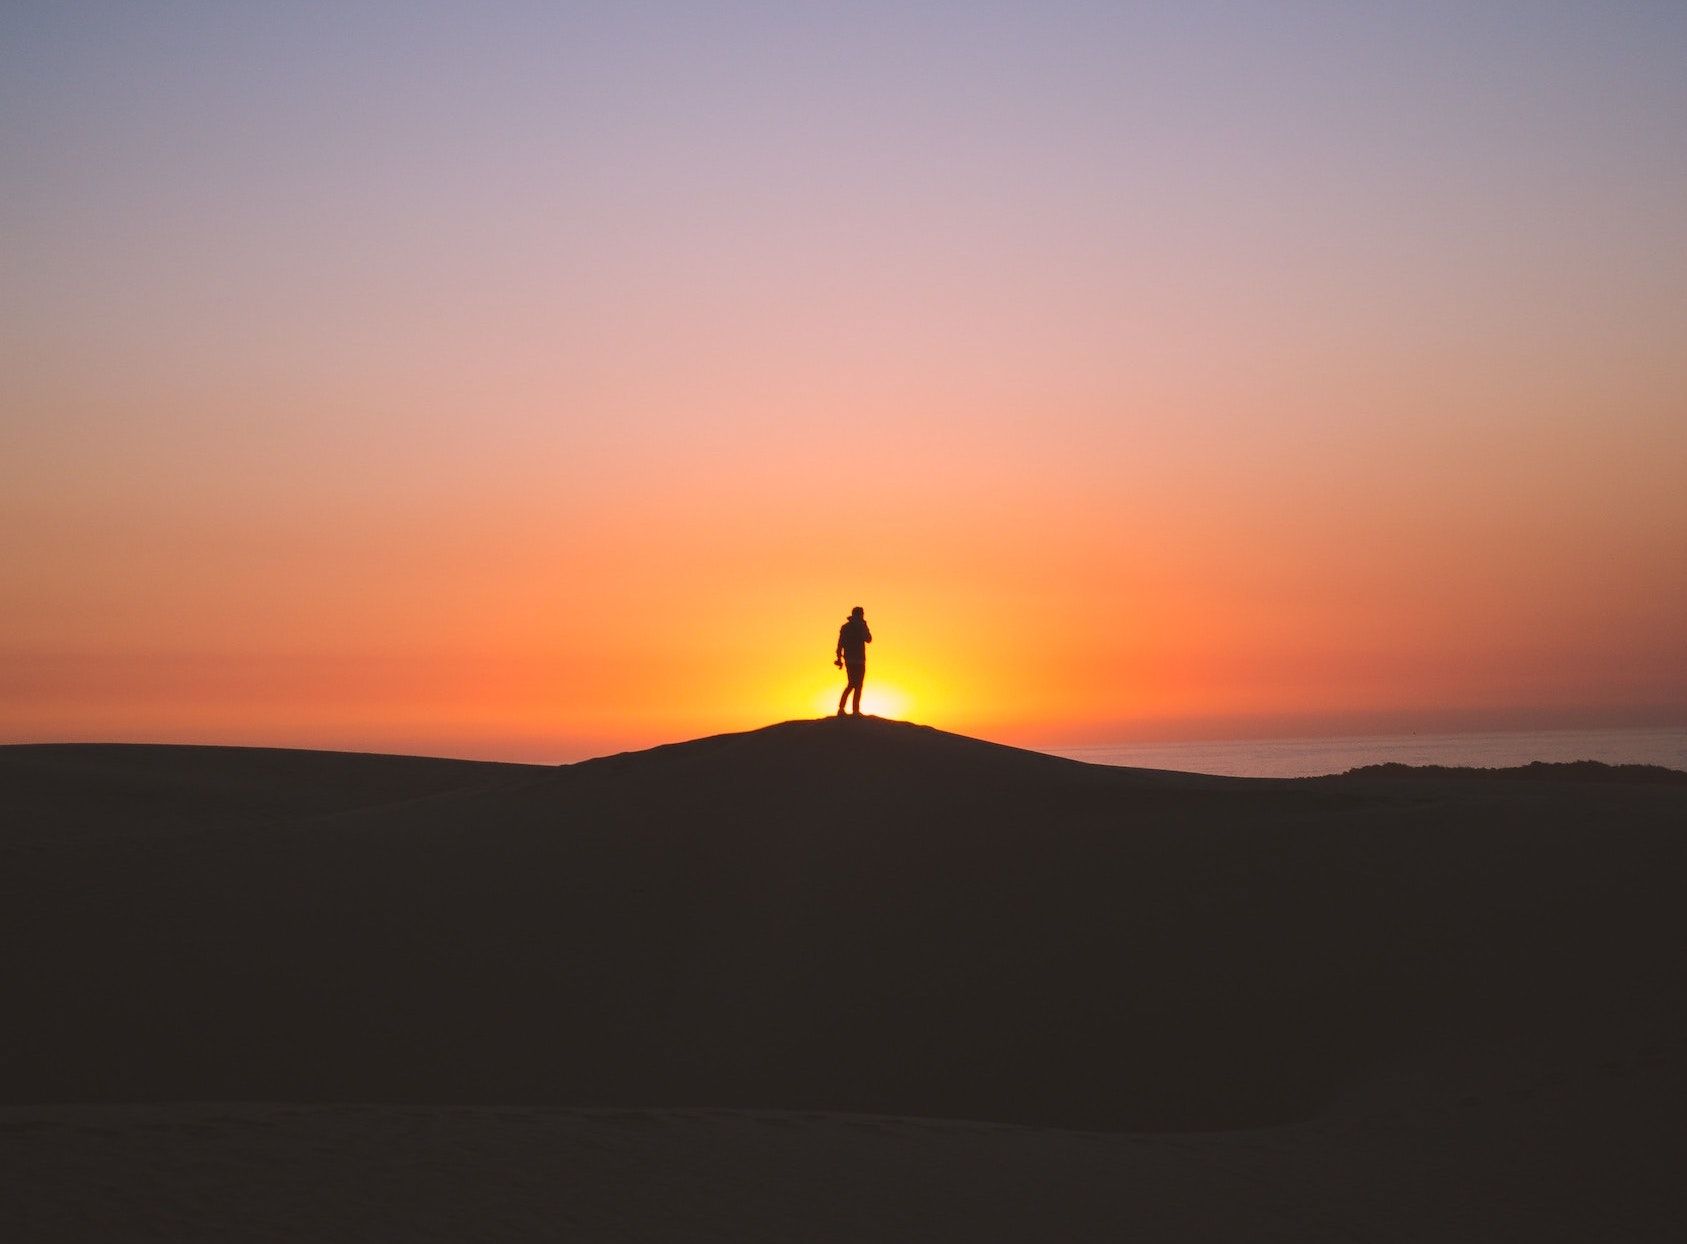 A person in shadow walks in front of a sunrise